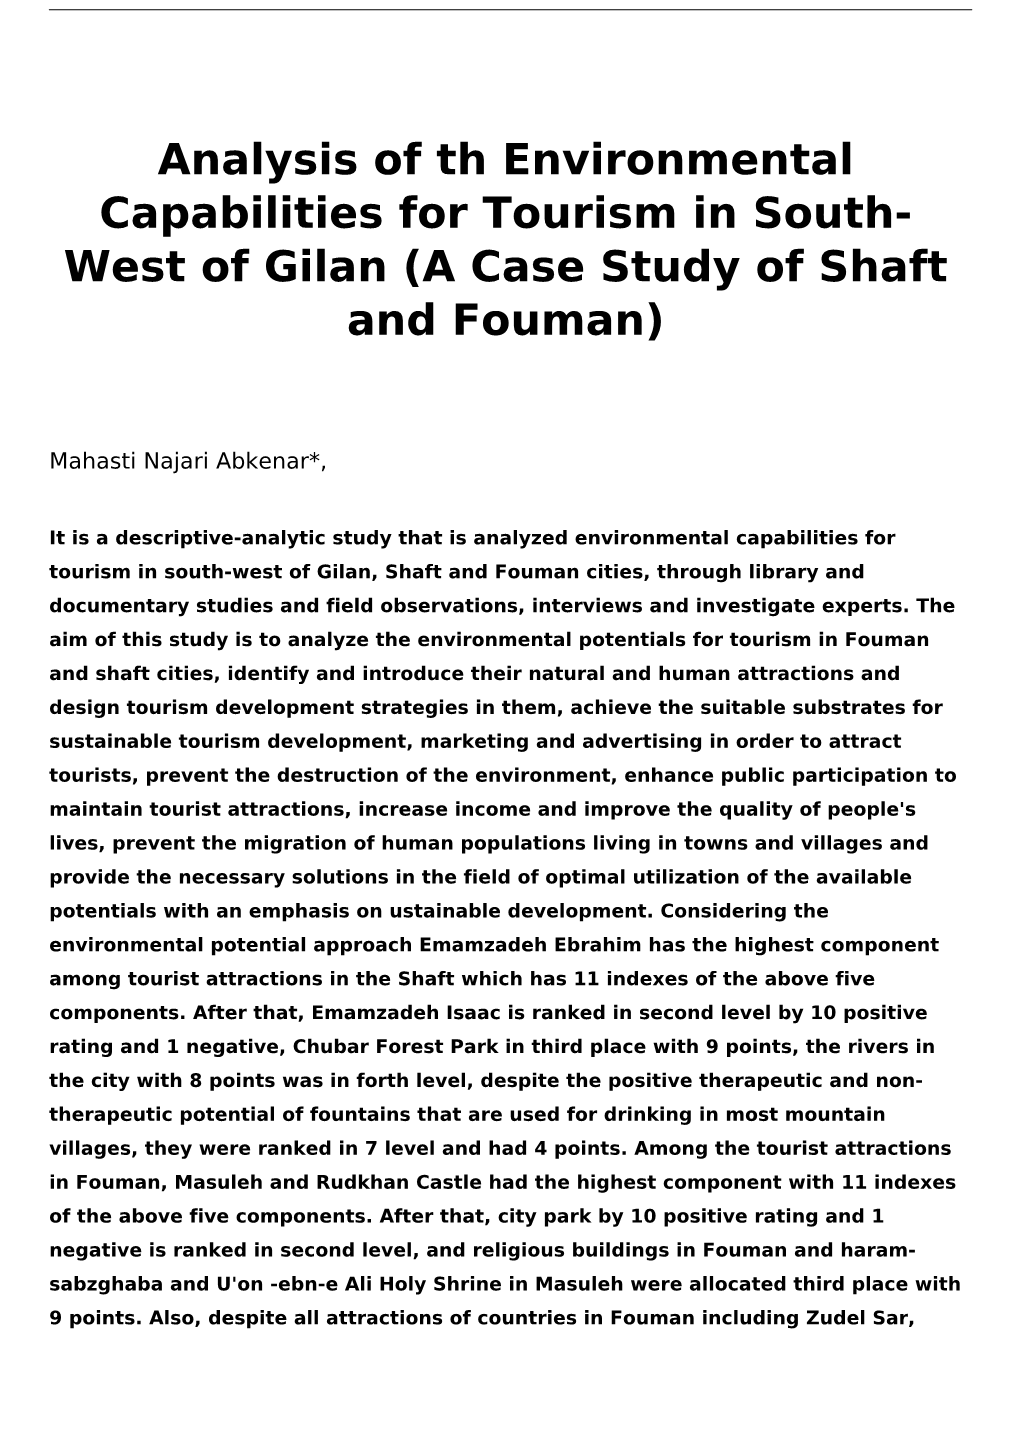 West of Gilan (A Case Study of Shaft and Fouman)